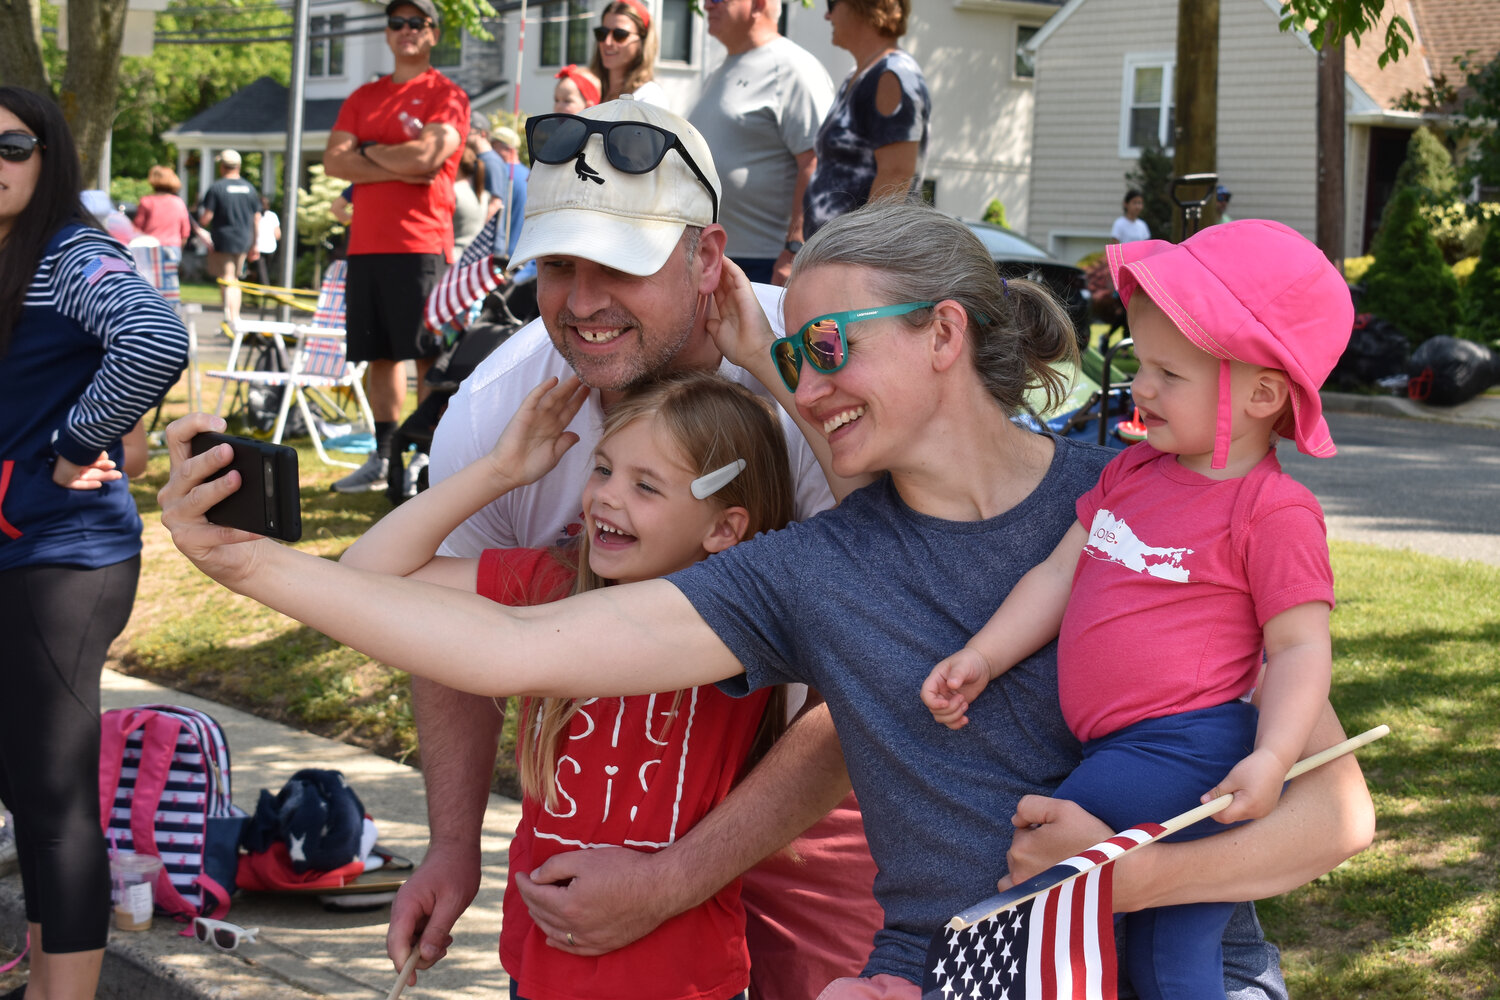 The Stadryck family, above, made memories during the parade, snapping a selfie.